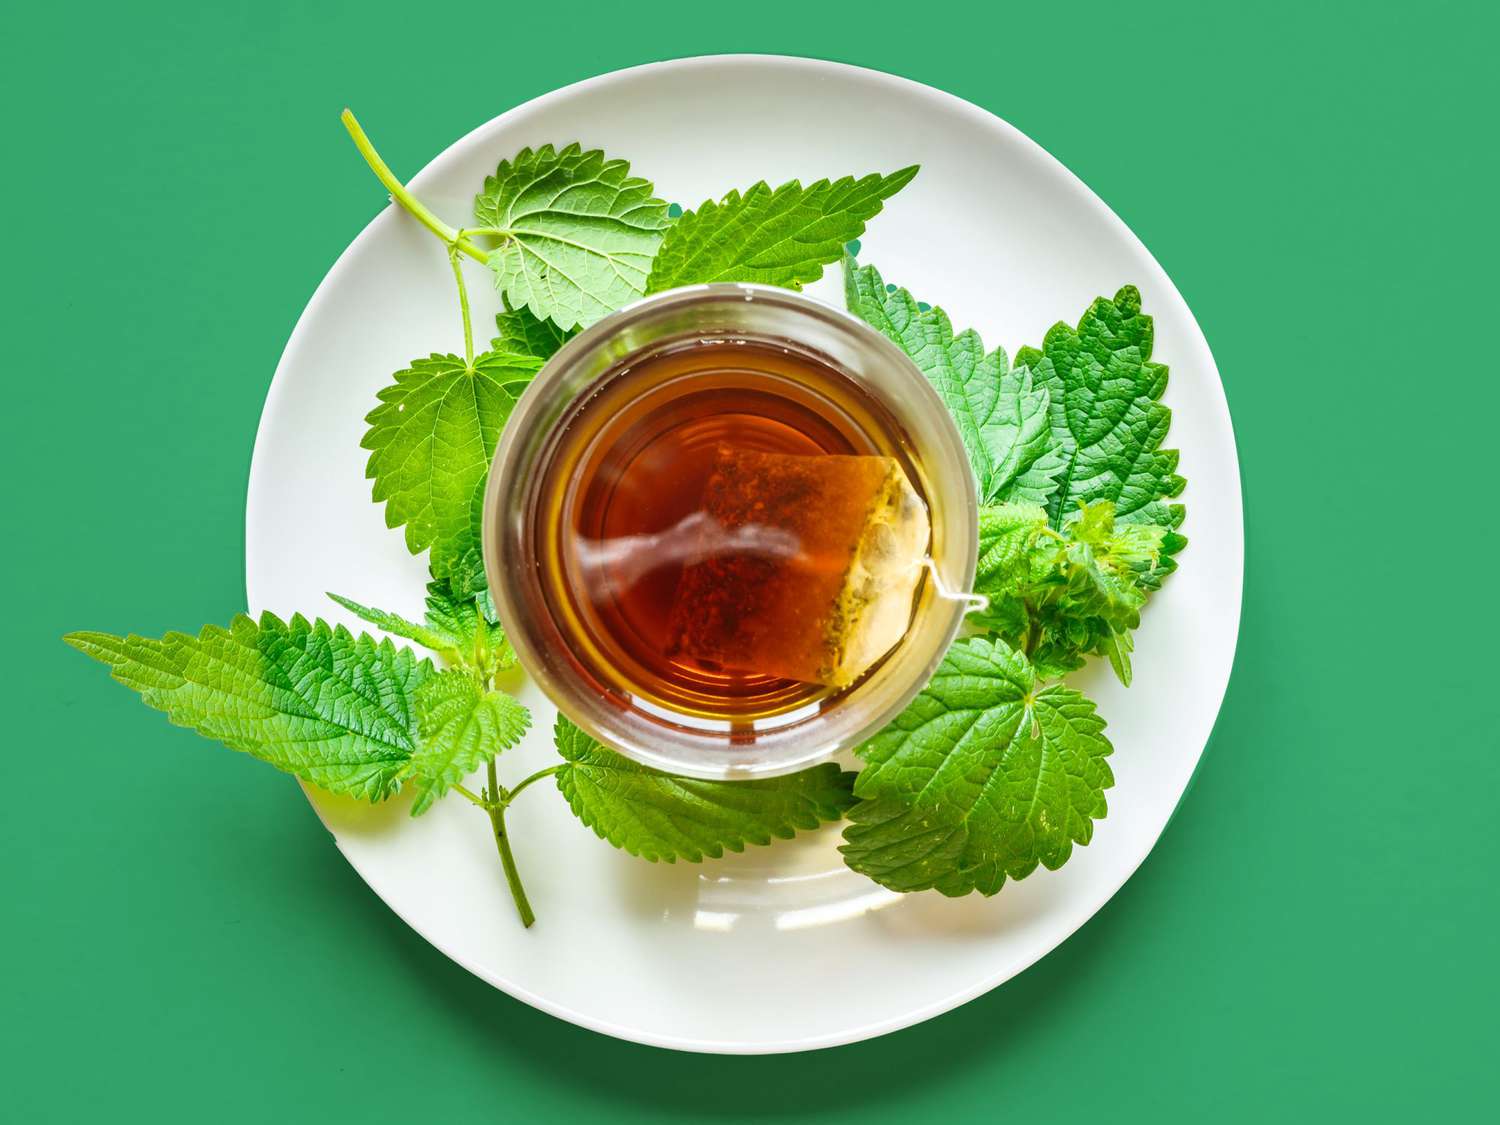 an image showing a glass with nettle tea, nettle tea bag and a saucer with nettle leaves on a green background.